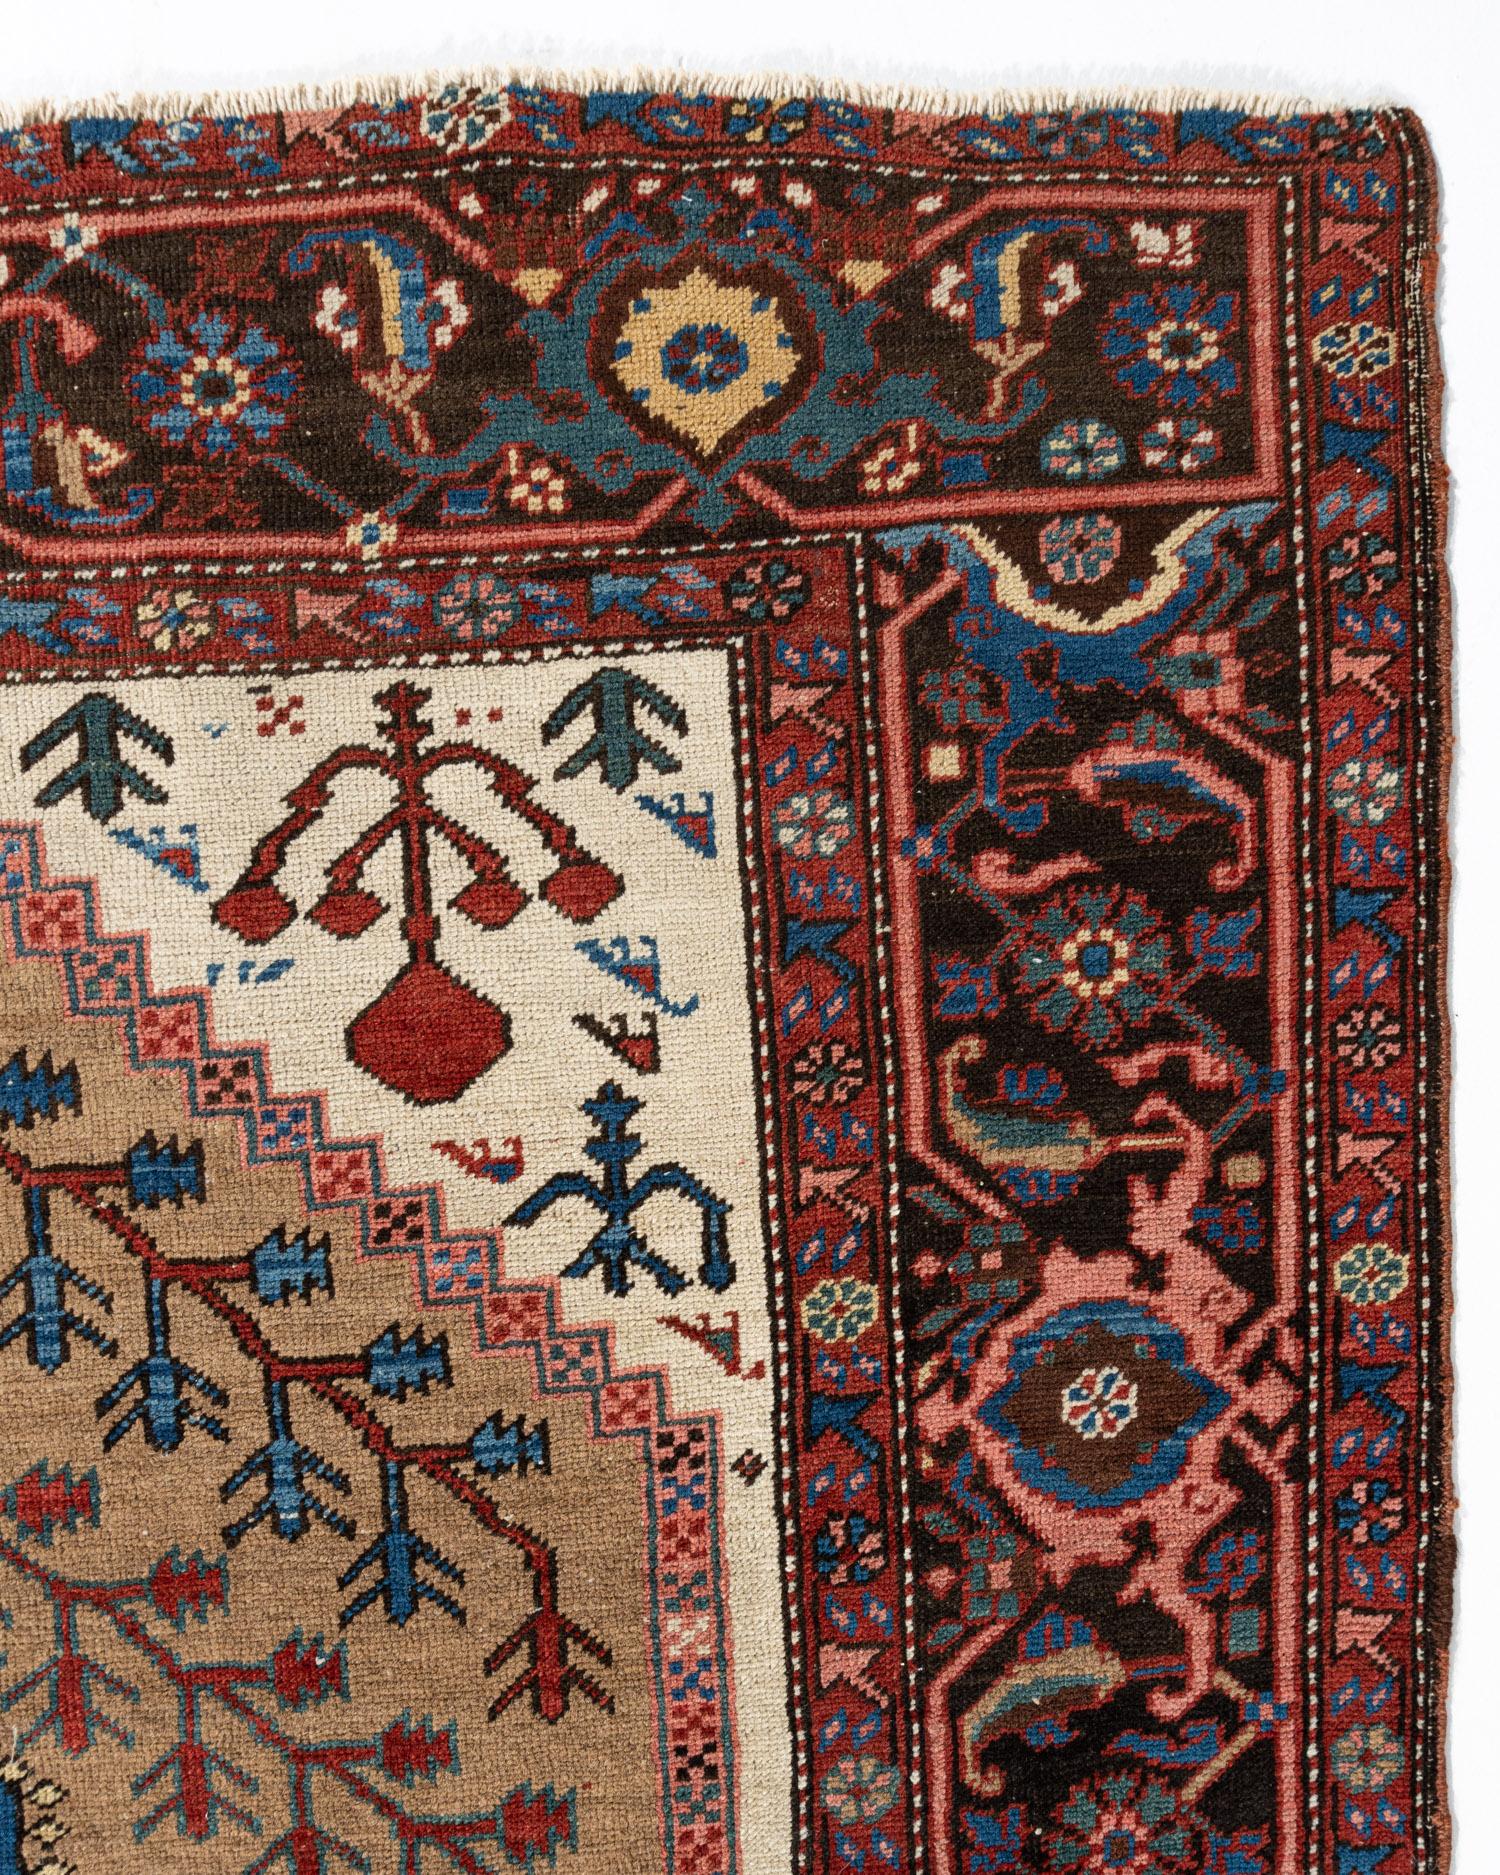 Antique Persian Camel Hair Bakshaish Area rug, 4'6 X 6'6. Although there is no town of Bakshaish in the Heriz weaving area, the term has been applied to those antique rugs & carpets from the later 19th century with generally allover patterns, mellow